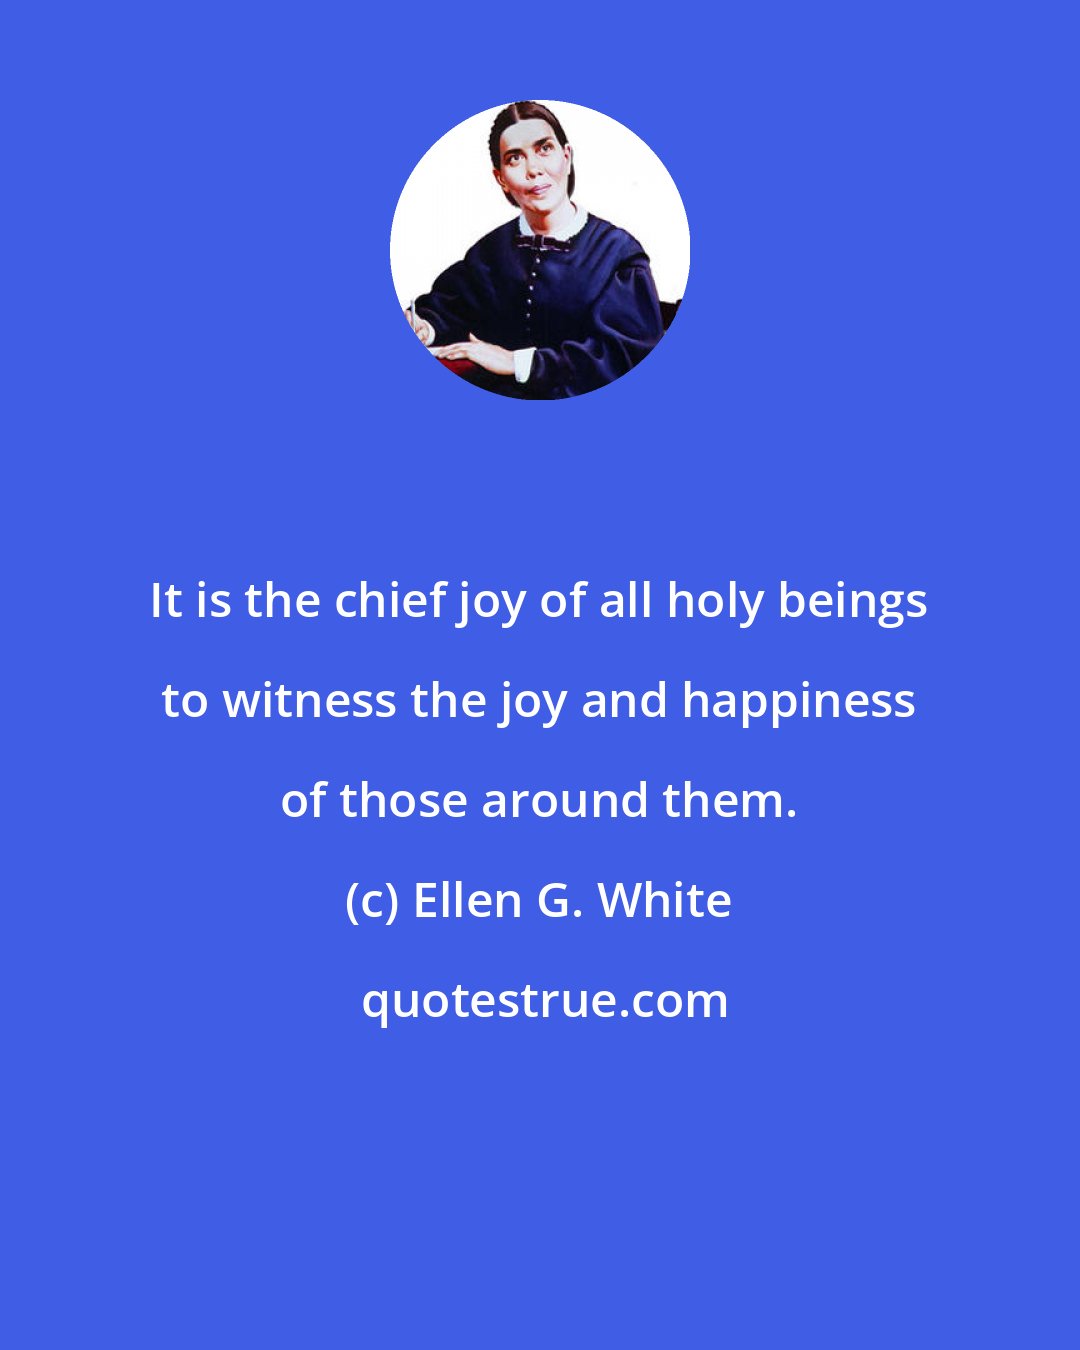 Ellen G. White: It is the chief joy of all holy beings to witness the joy and happiness of those around them.